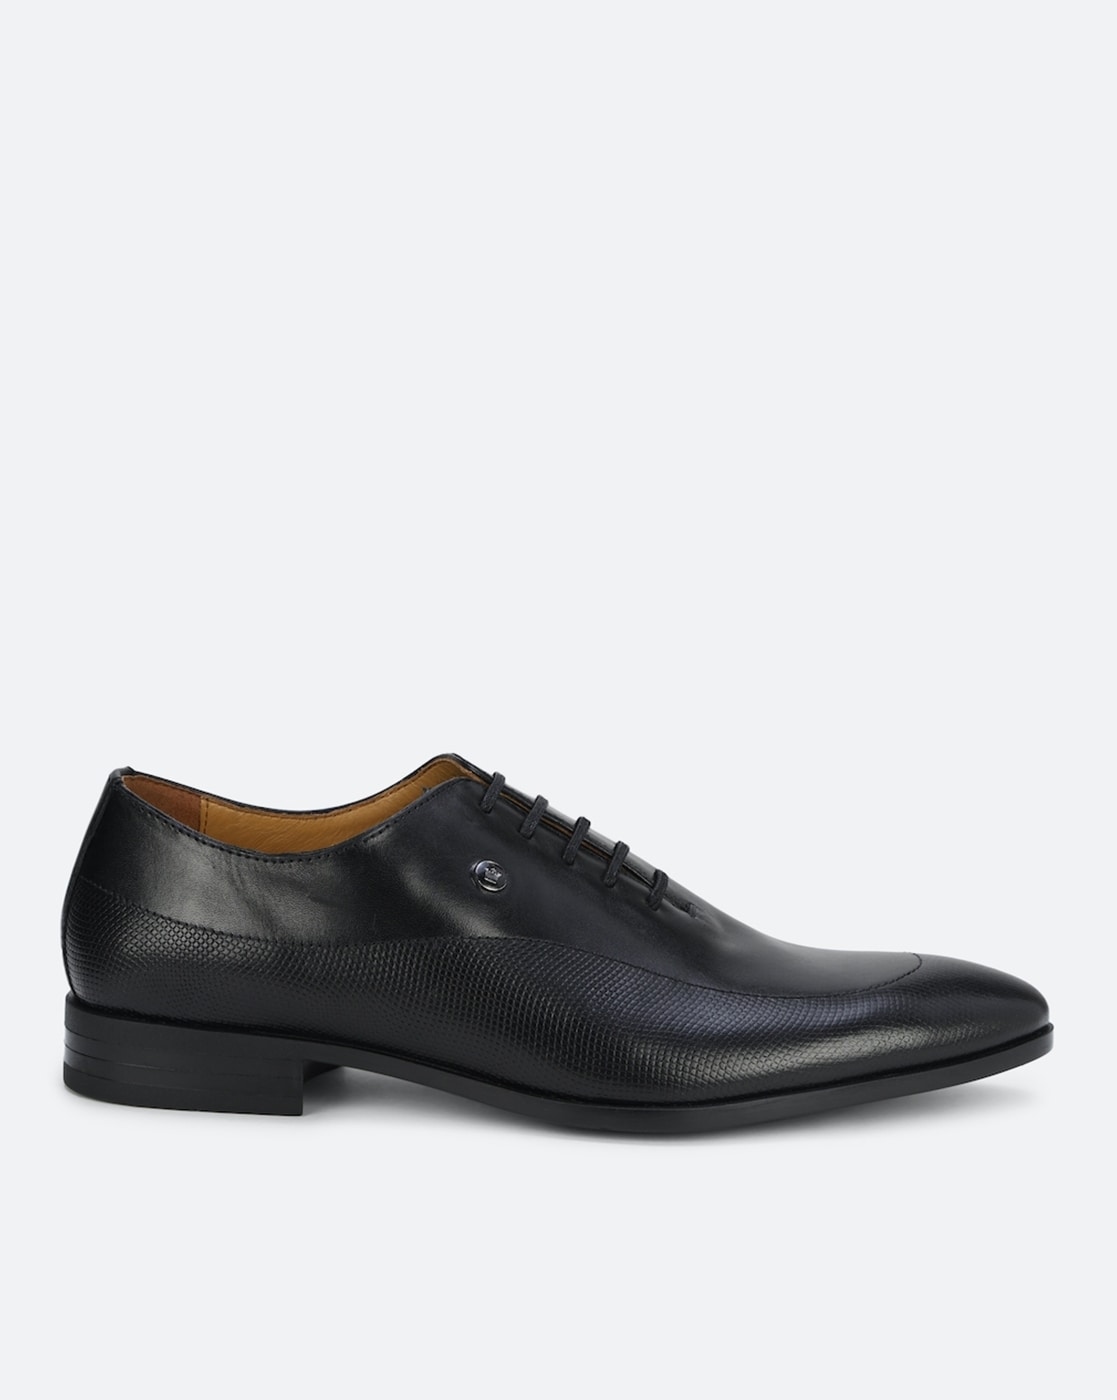 Buy Louis Philippe Brogues online - Men - 4 products